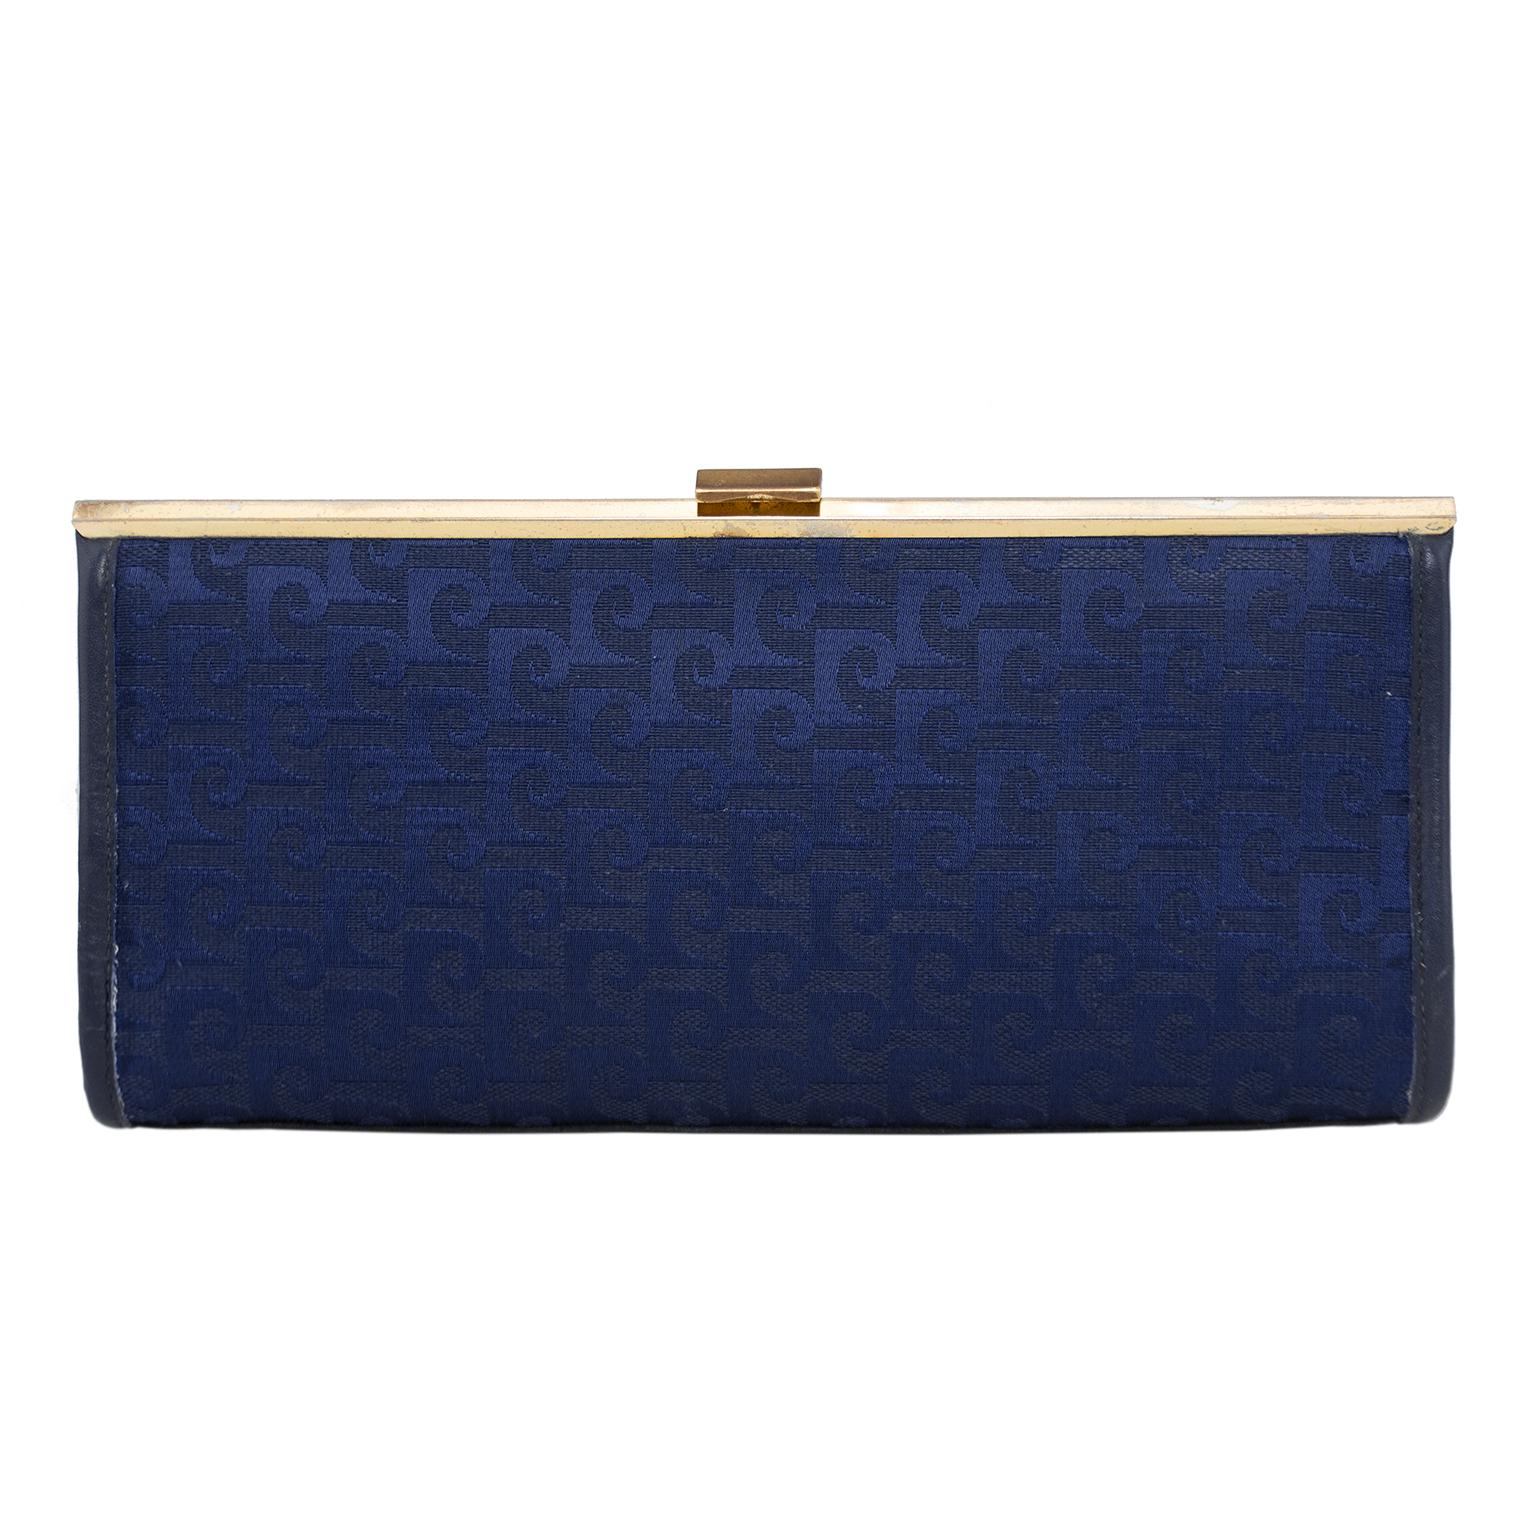 Pierre Cardin clutch from the 1960s. Frame style with gold tone metal frame and clasp. Navy blue jacquard with all over Pierre Cardin logos. Navy blue lining and single horizontal zip slit pocket. A great and lightweight clutch for a night out. Very